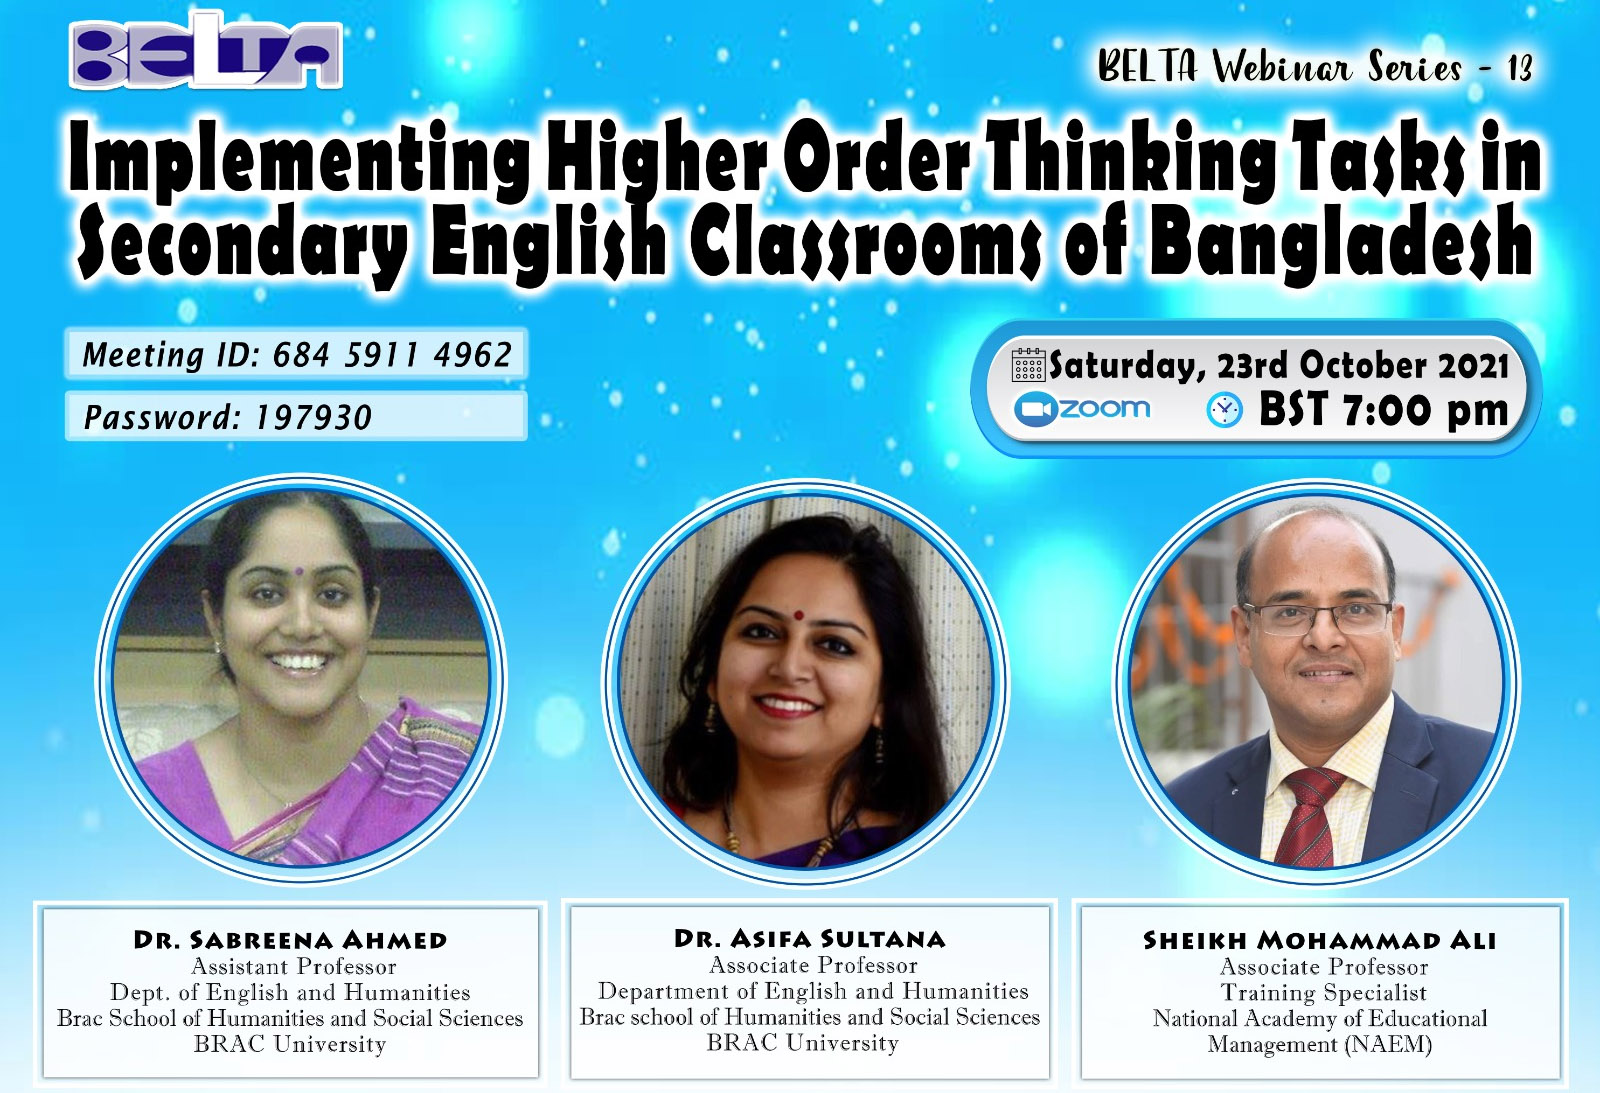 Implementing Higher Order Thinking Tasks in Secibdary English Classrooms of Bangladesh